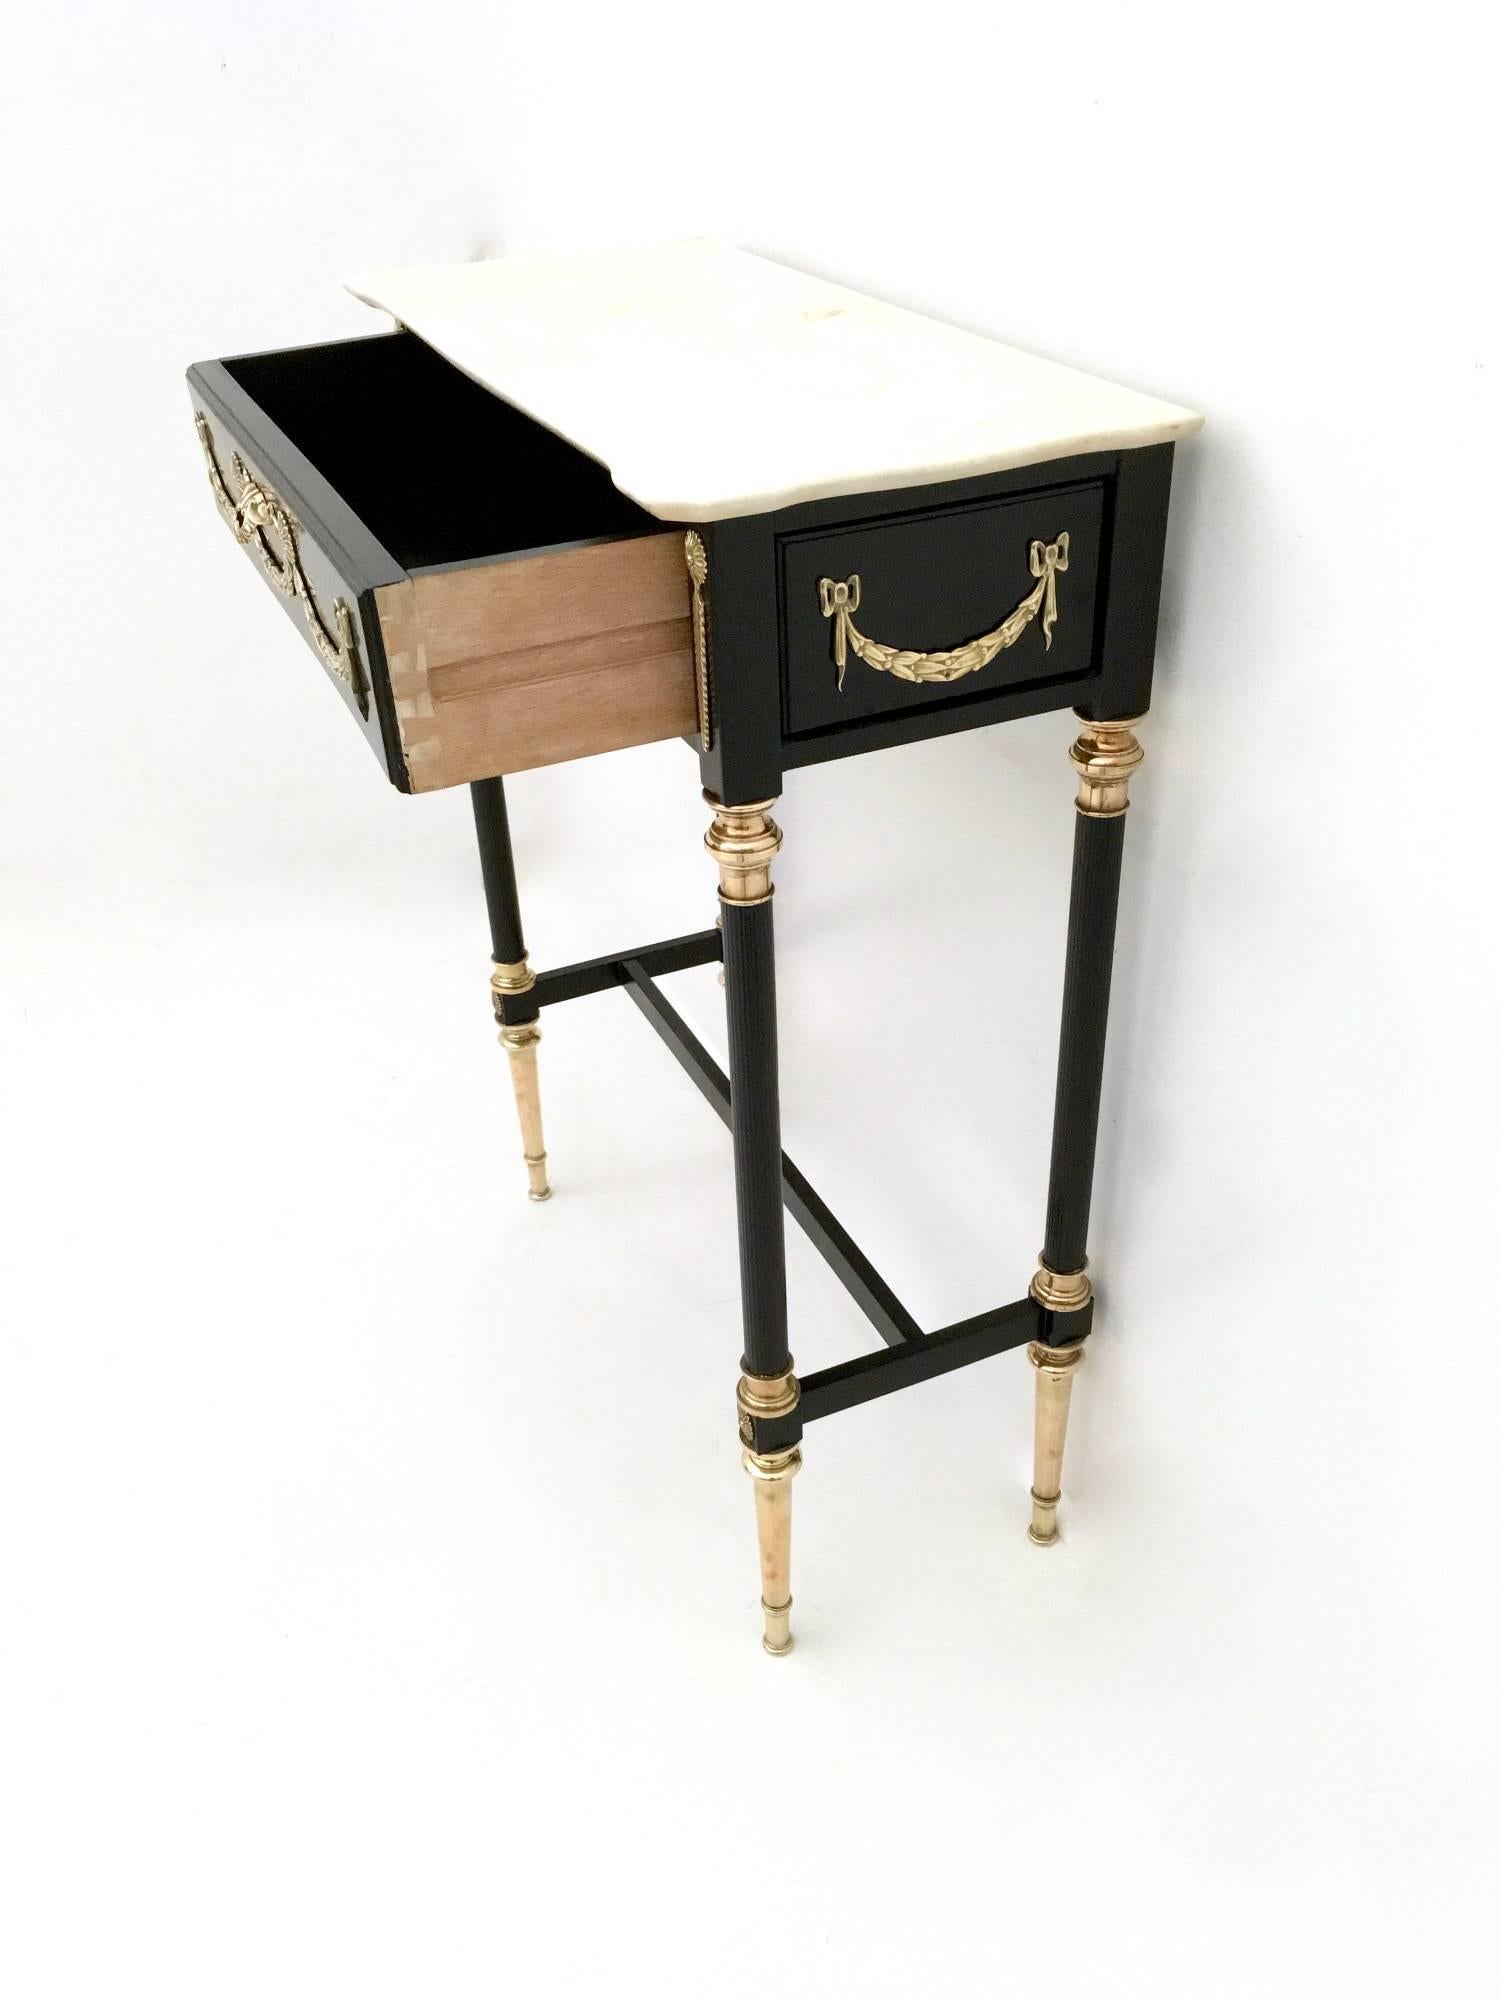 Mid-20th Century Lacquered Wood Console Table with Carrara Marble Top in Luigi XVI Style, 1950s